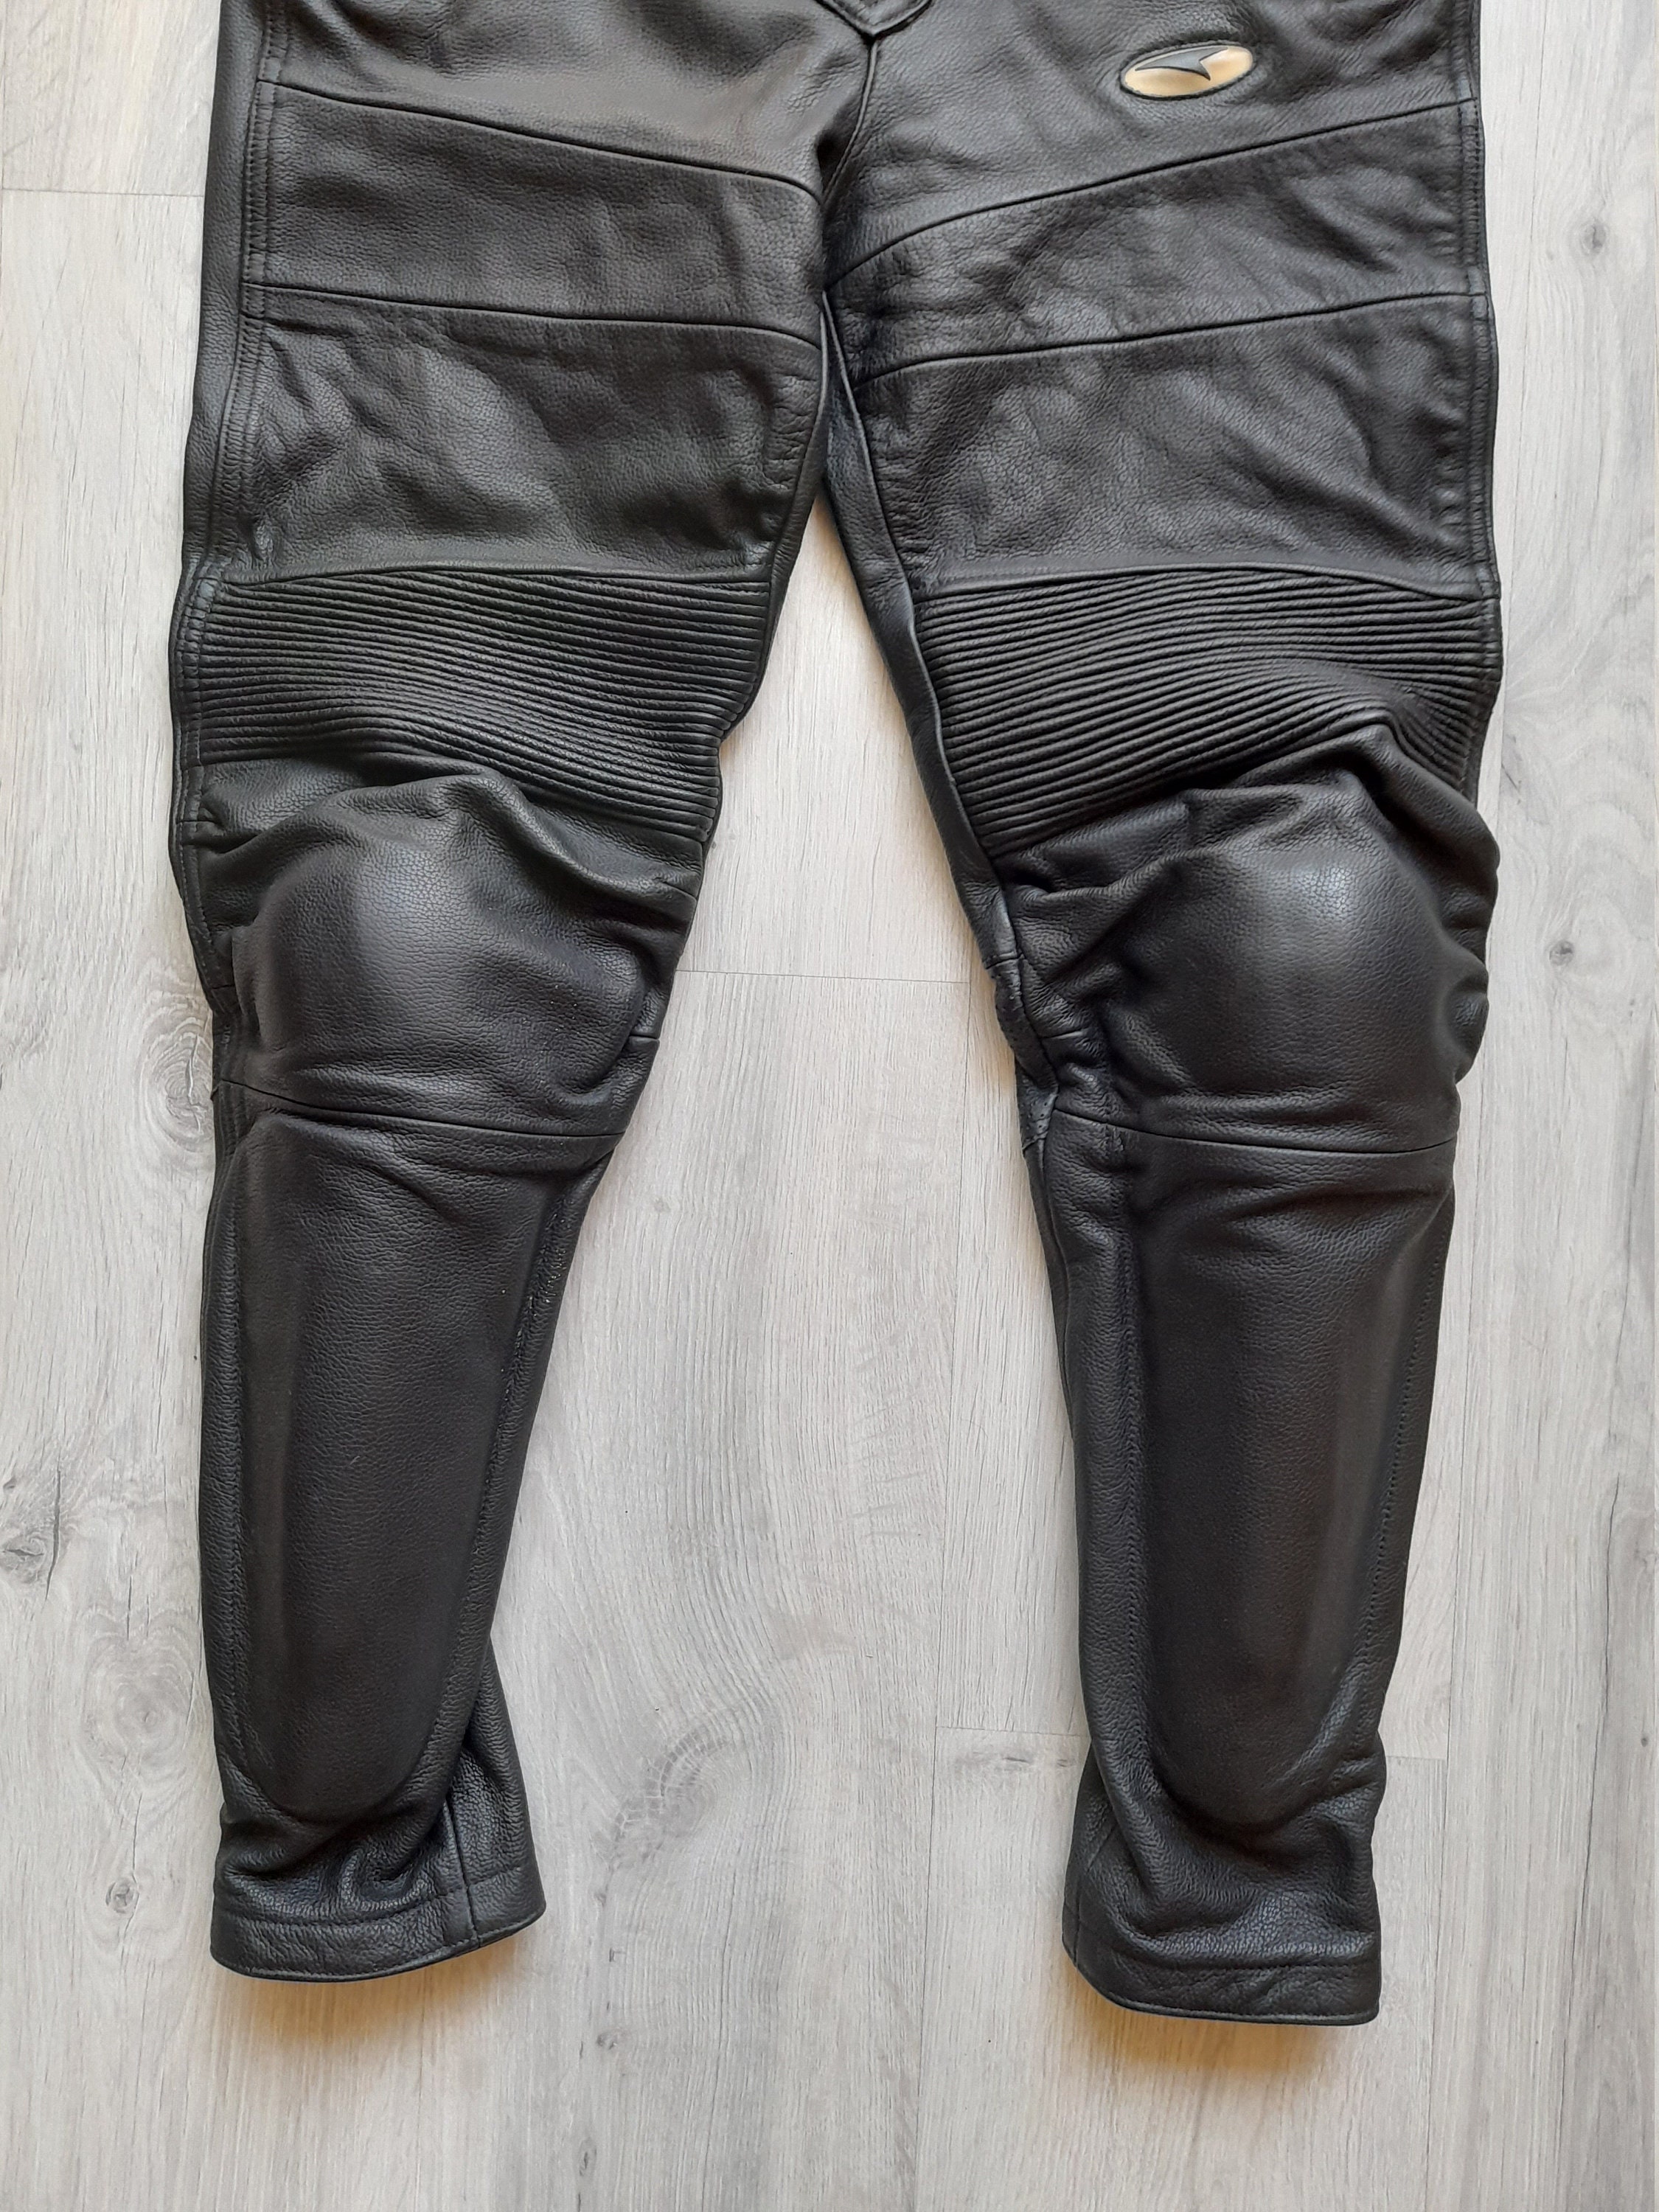 Axo Racing Leather pants Real Leather Biker Motorcycle | Etsy